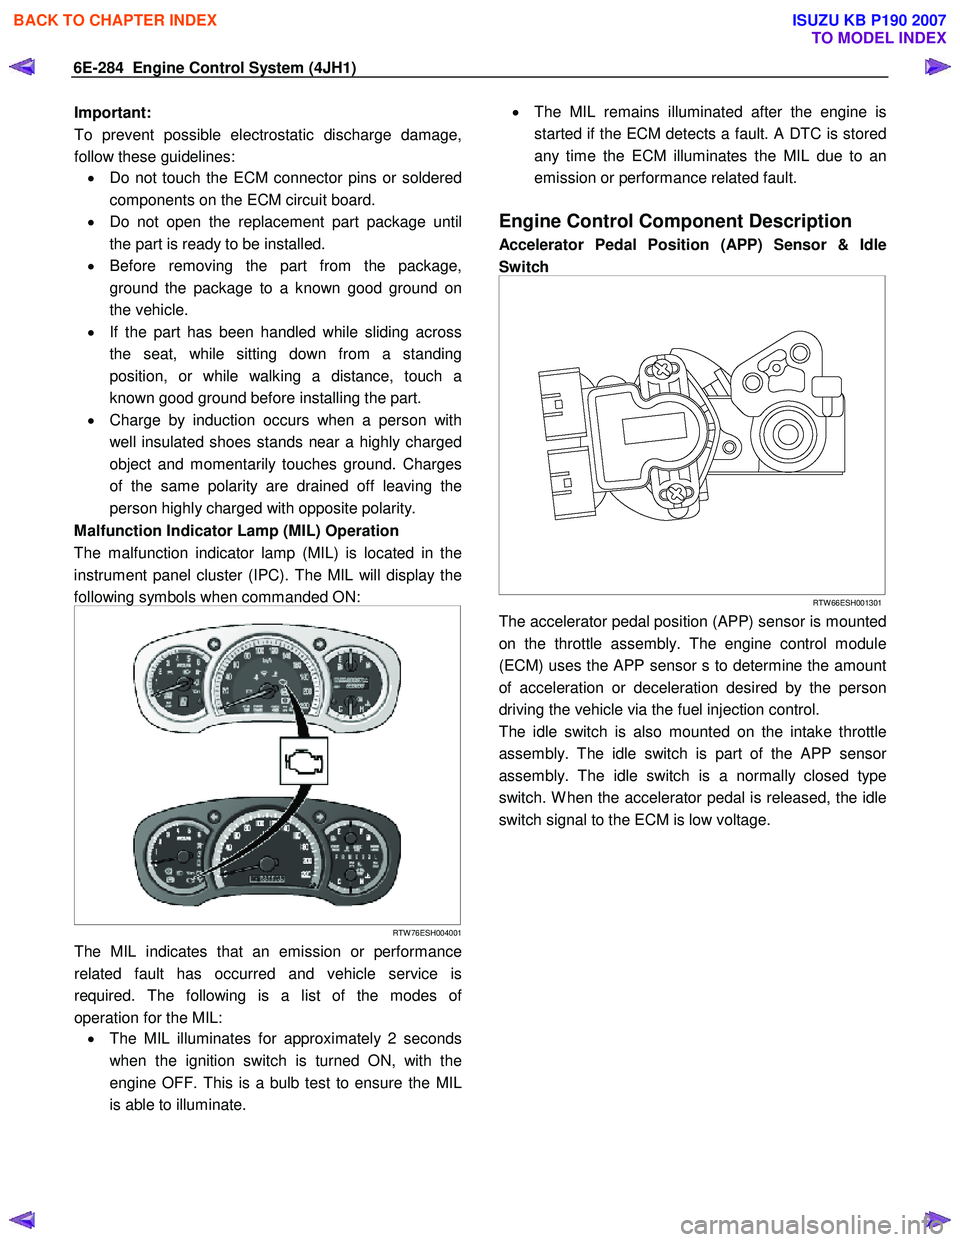 ISUZU KB P190 2007  Workshop Repair Manual 6E-284  Engine Control System (4JH1) 
Important:   
To prevent possible electrostatic discharge damage, 
follow these guidelines:  •  Do not touch the ECM connector pins or soldered
components on th